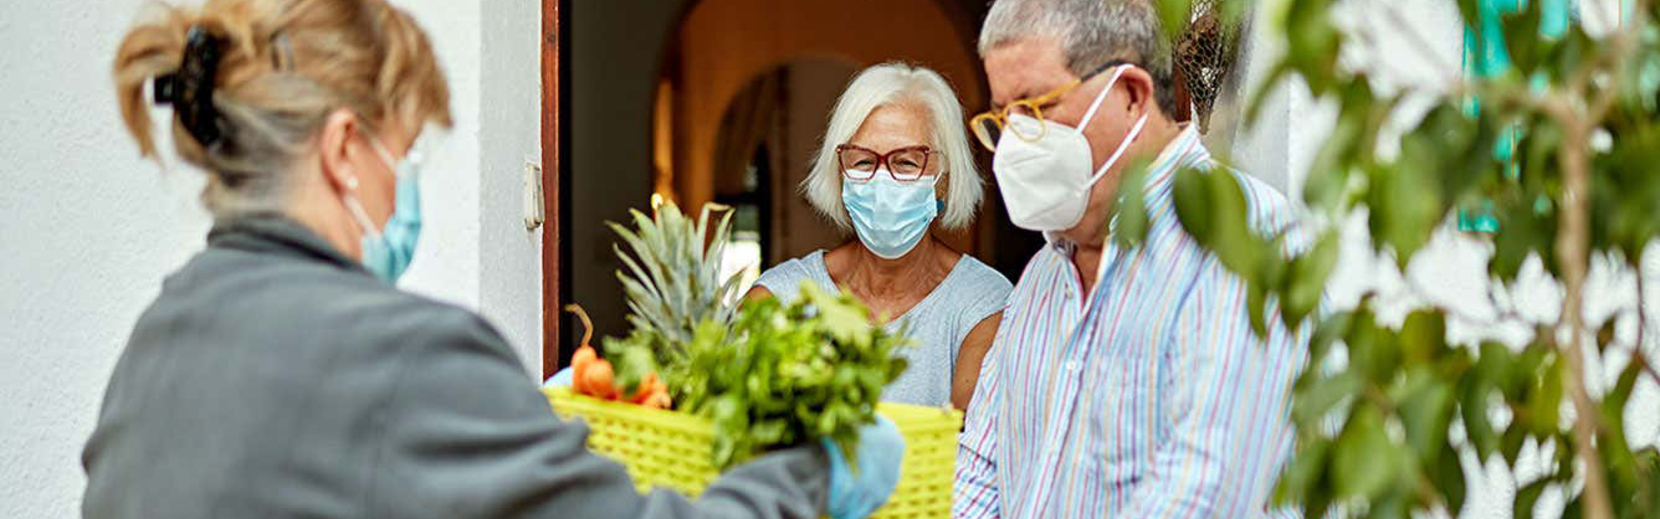 Older adults in face masks receive a grocery delivery